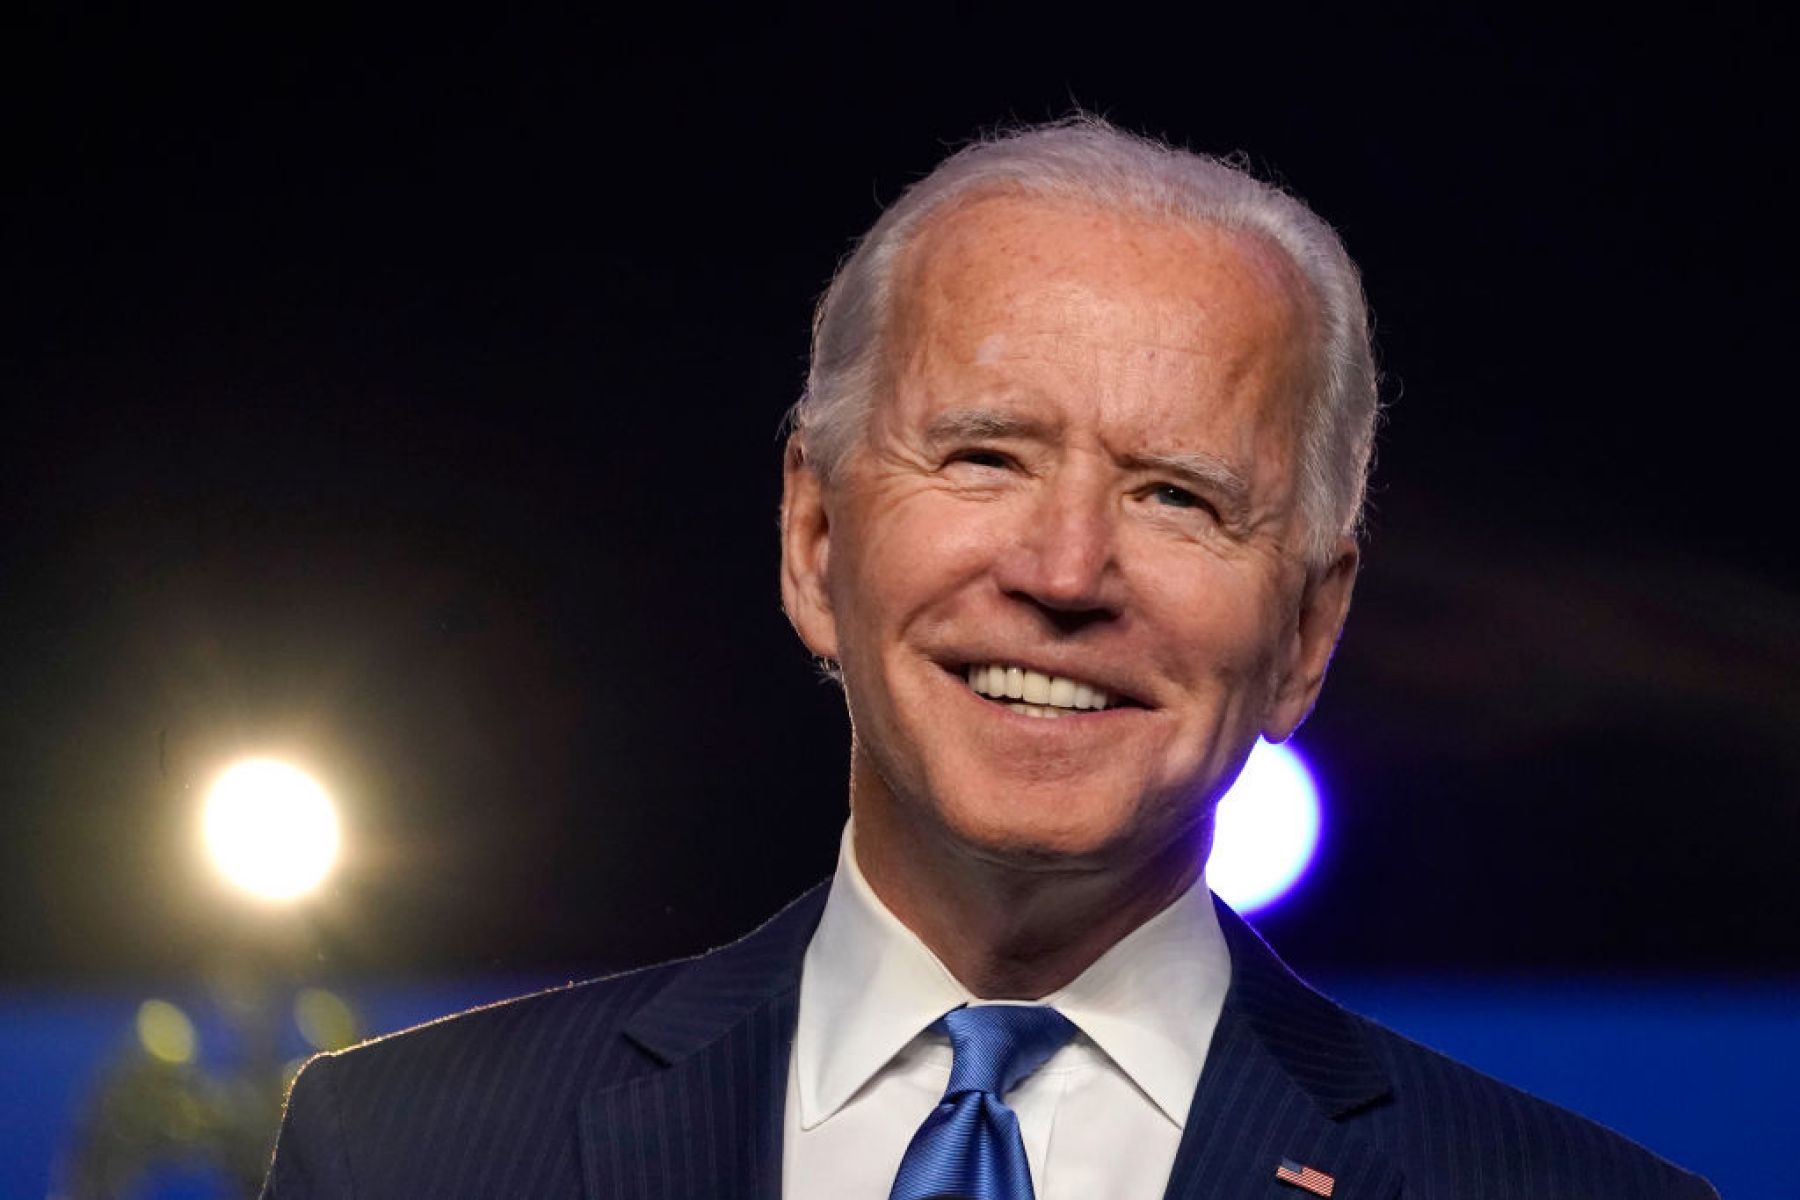 President Joe Biden's administration has scored a major first victory with the full passage of its $1.9 trillion COVID-19 relief package. Photo: Getty Images.